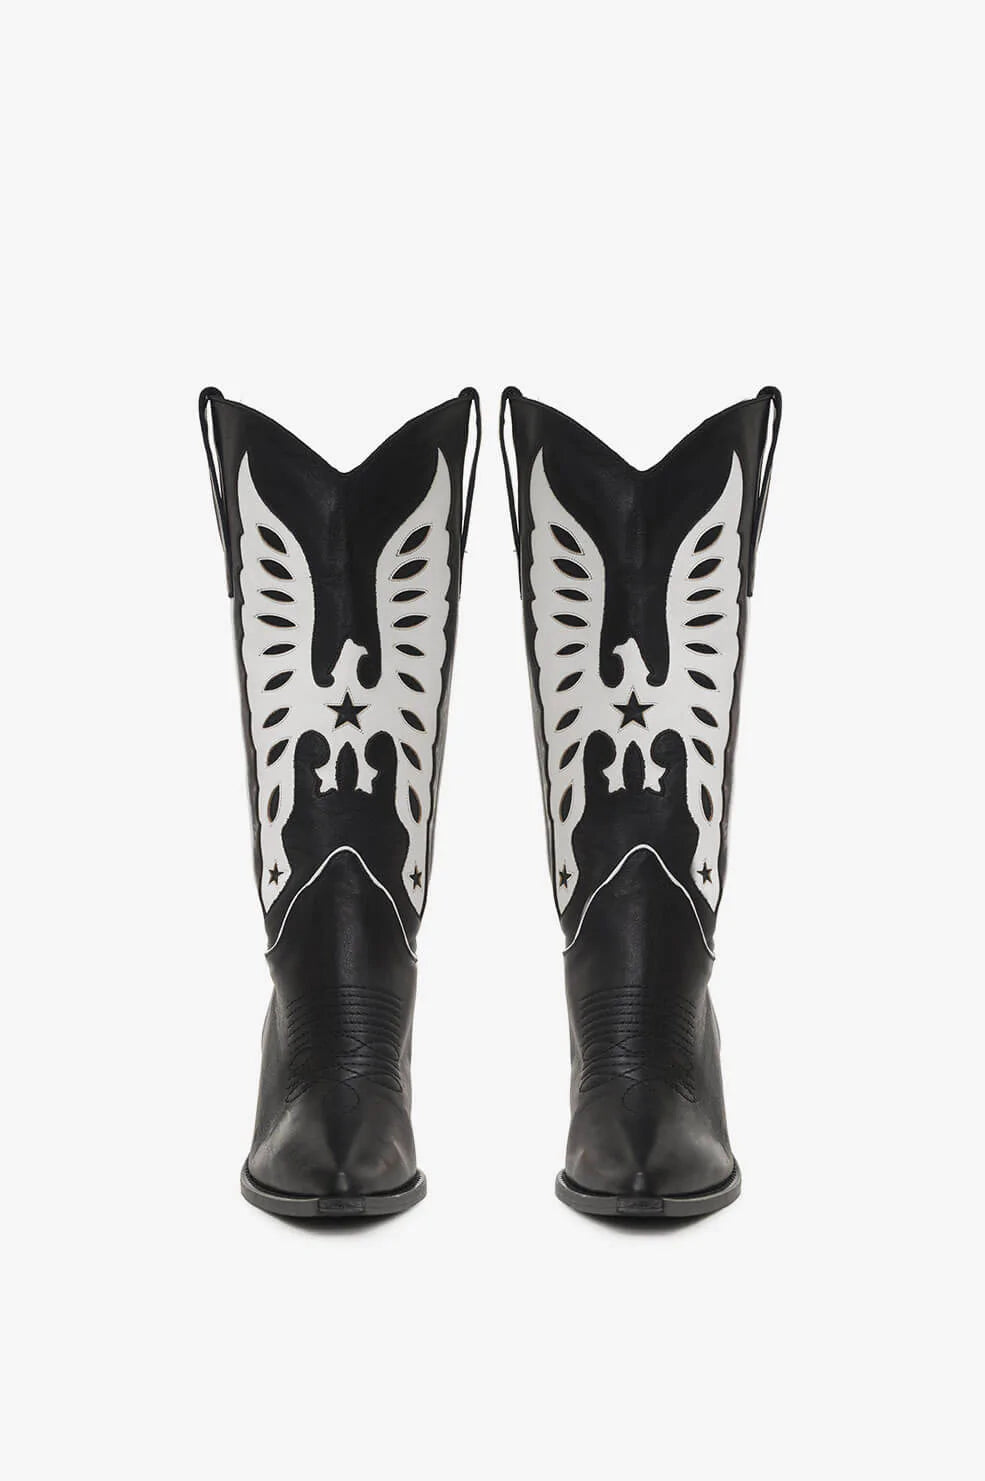 Anine Bing - Mid Calf Tania Boots in Black and White